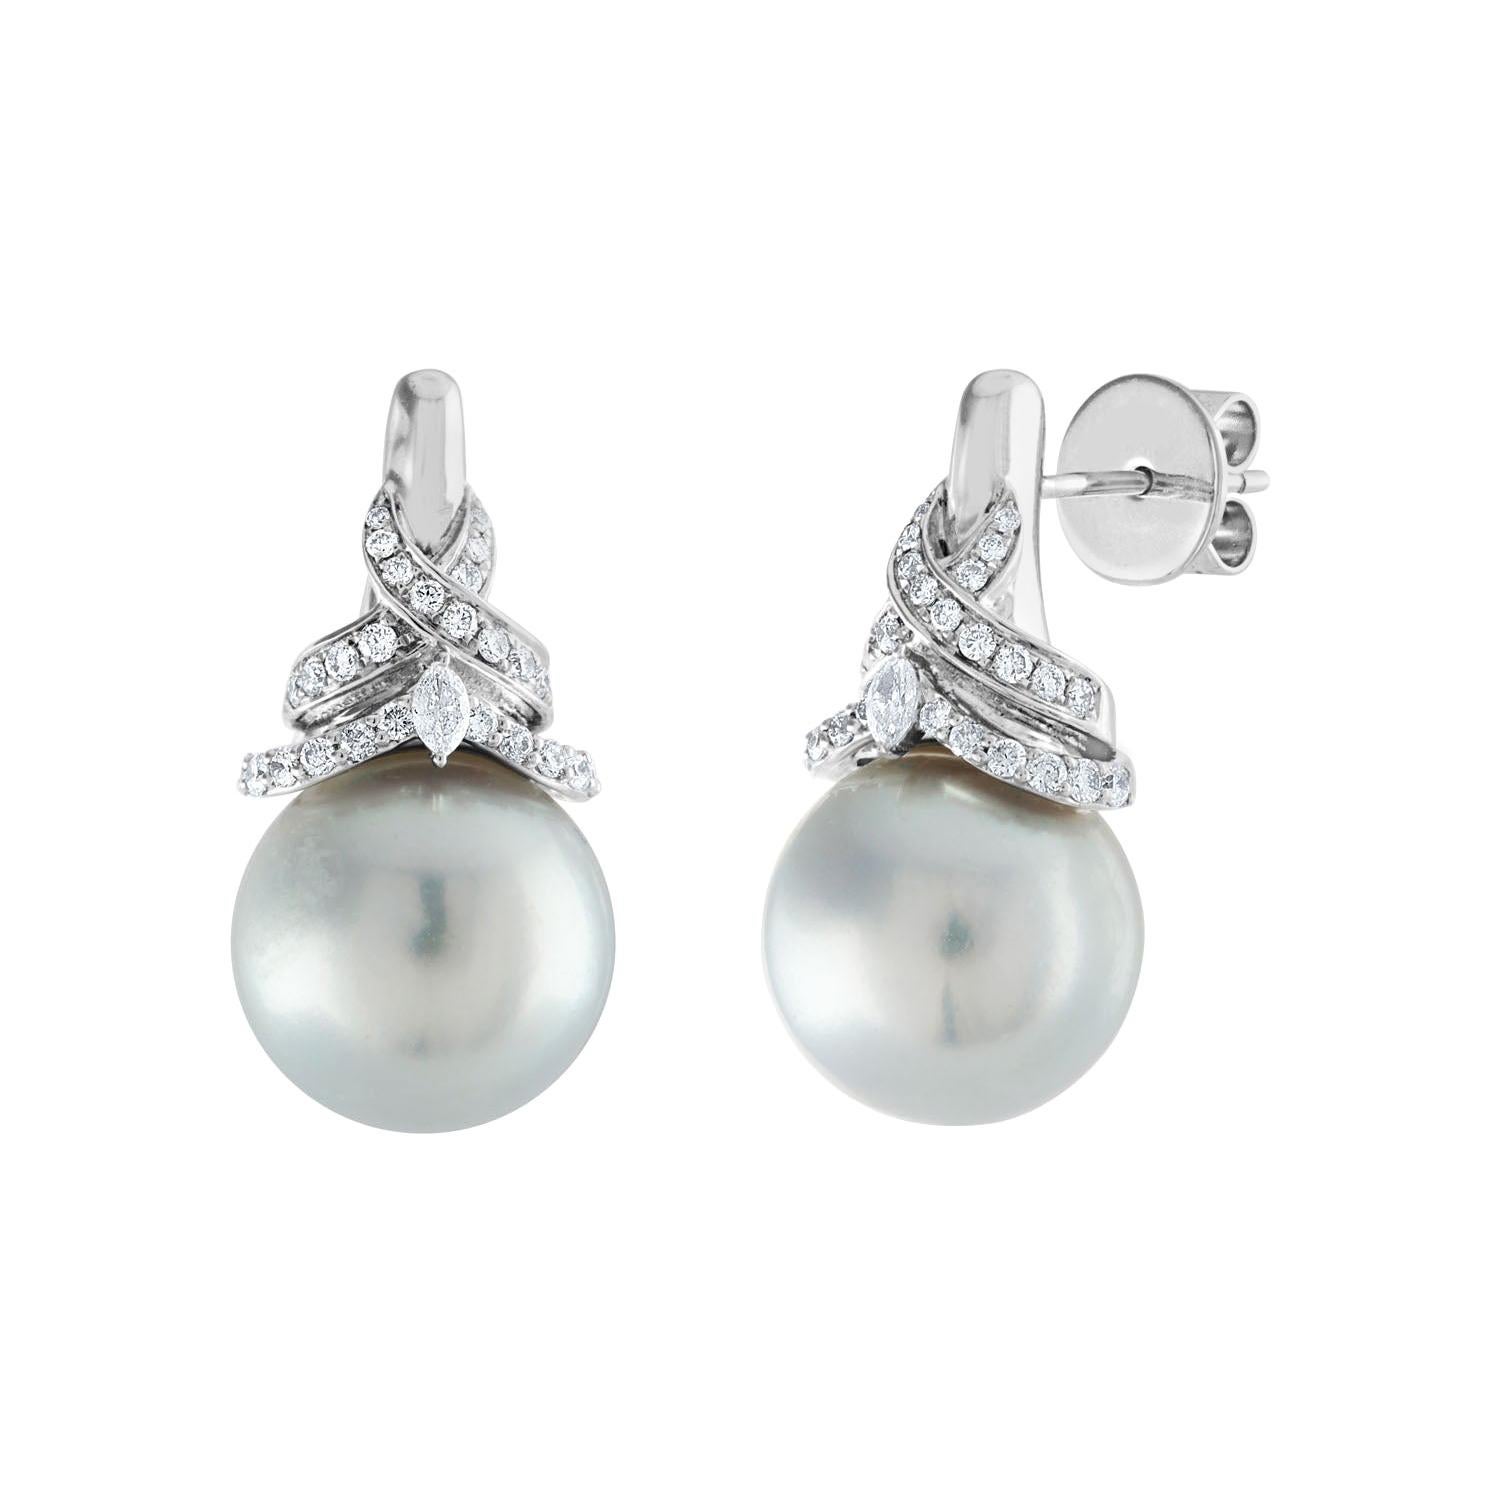 0.52 Carat Diamond and South Sea Pearls Gold Earrings